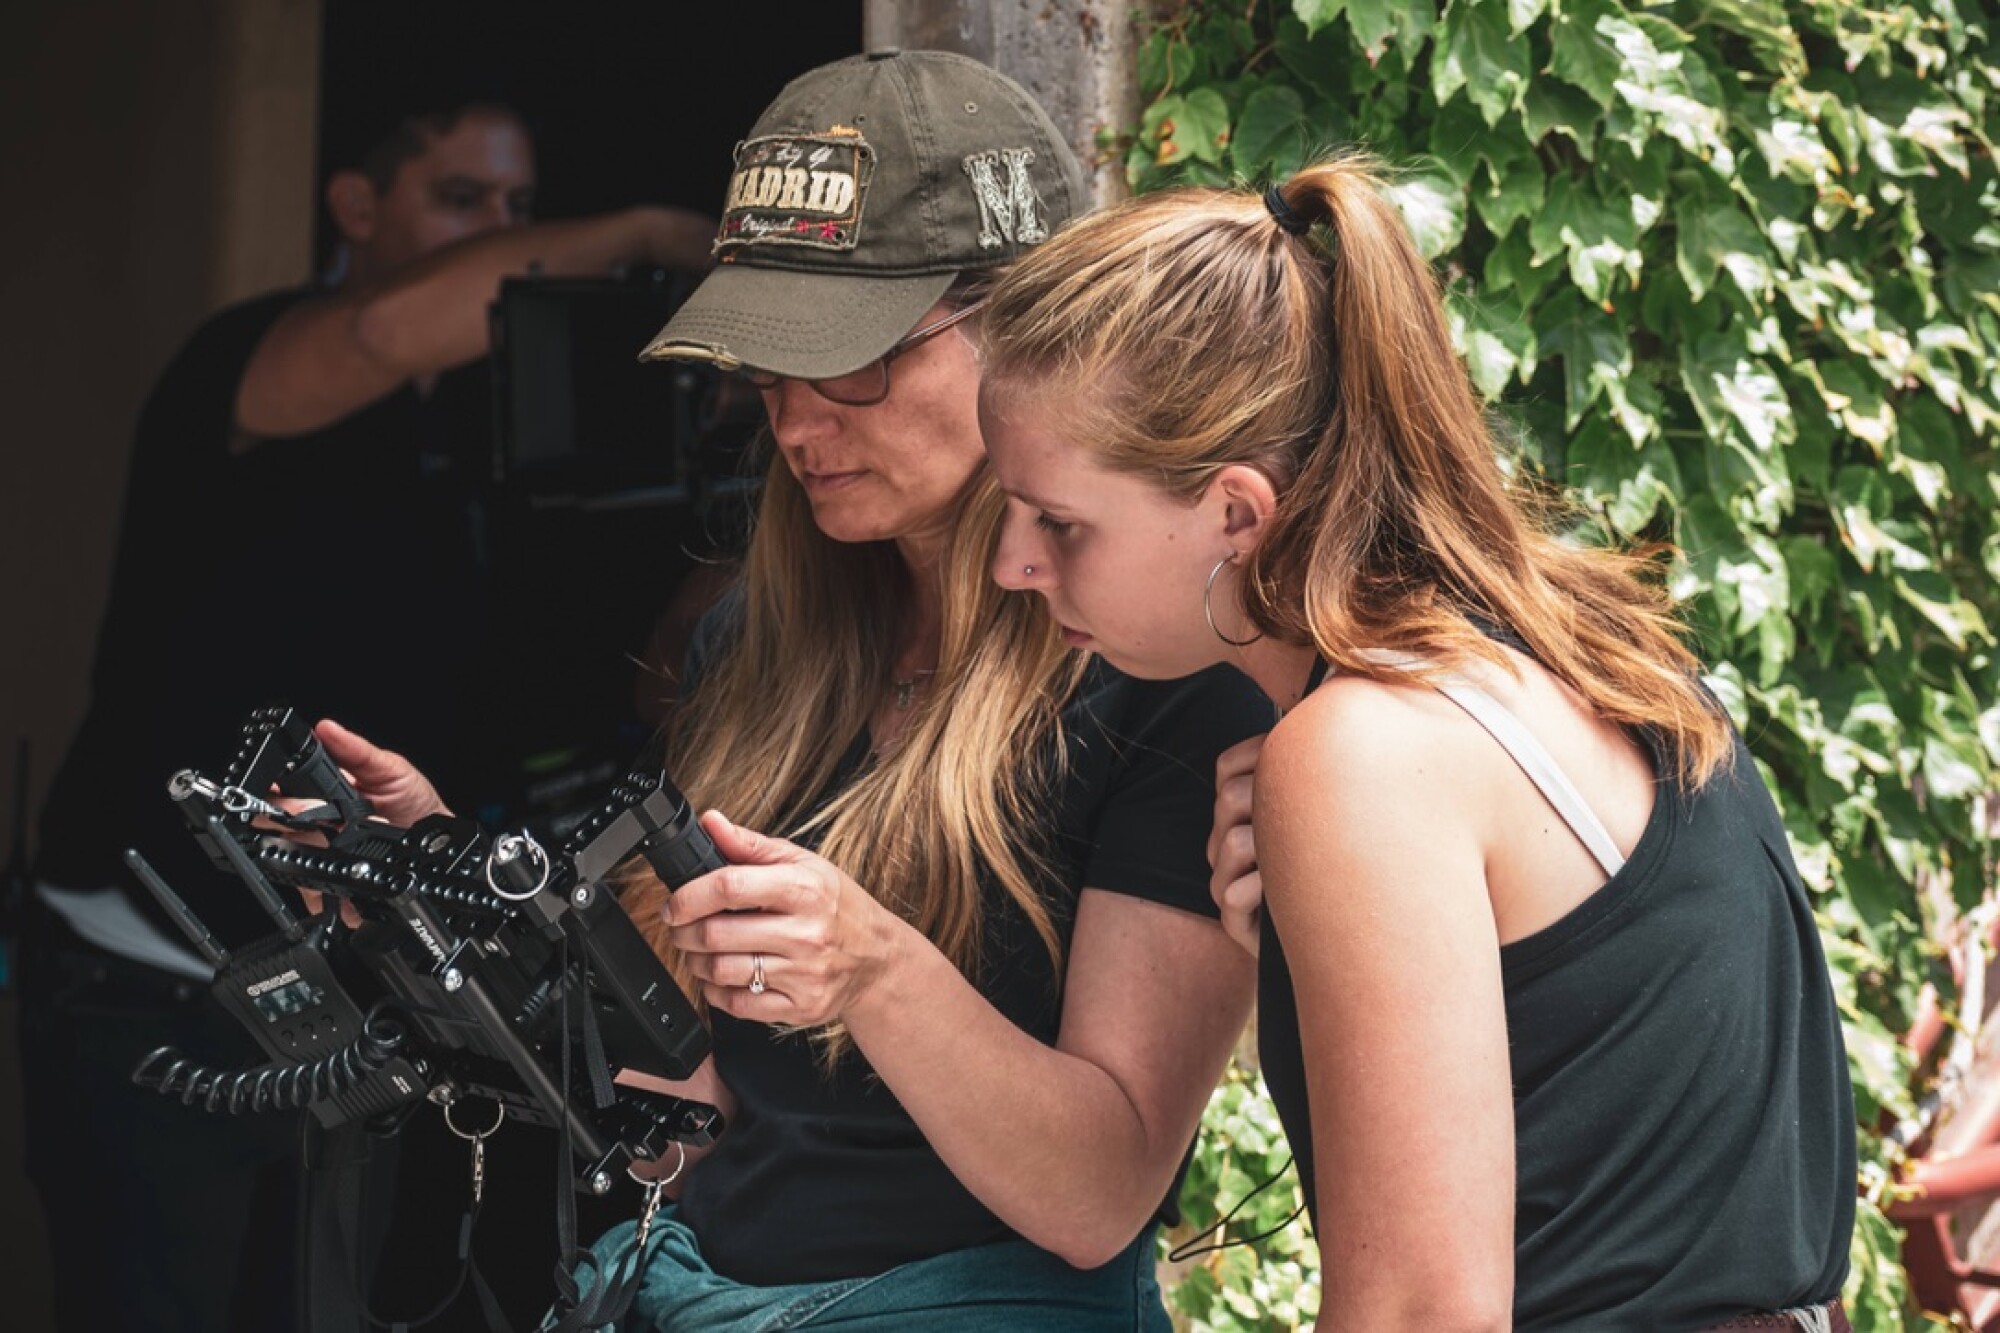 Director Maggie Marht (left) reviews a shot with Katie Gerlach during shooting of "O, Brawling Love!"